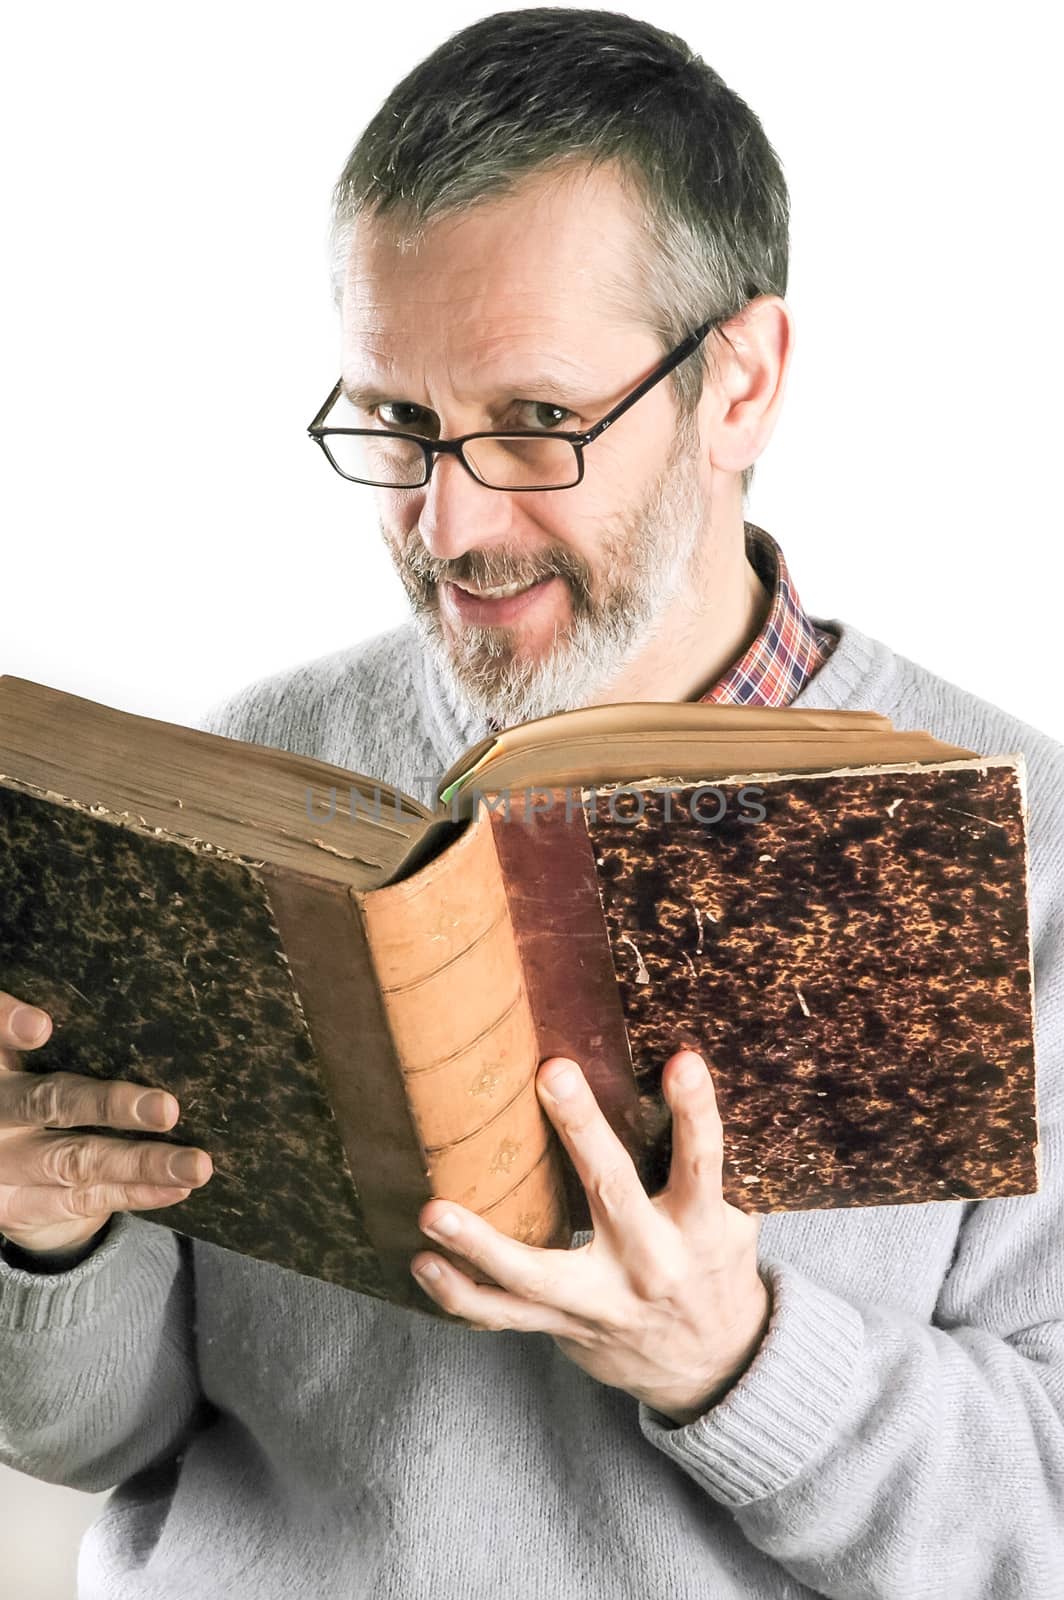 A smiing man reading an old book and wearing glasses